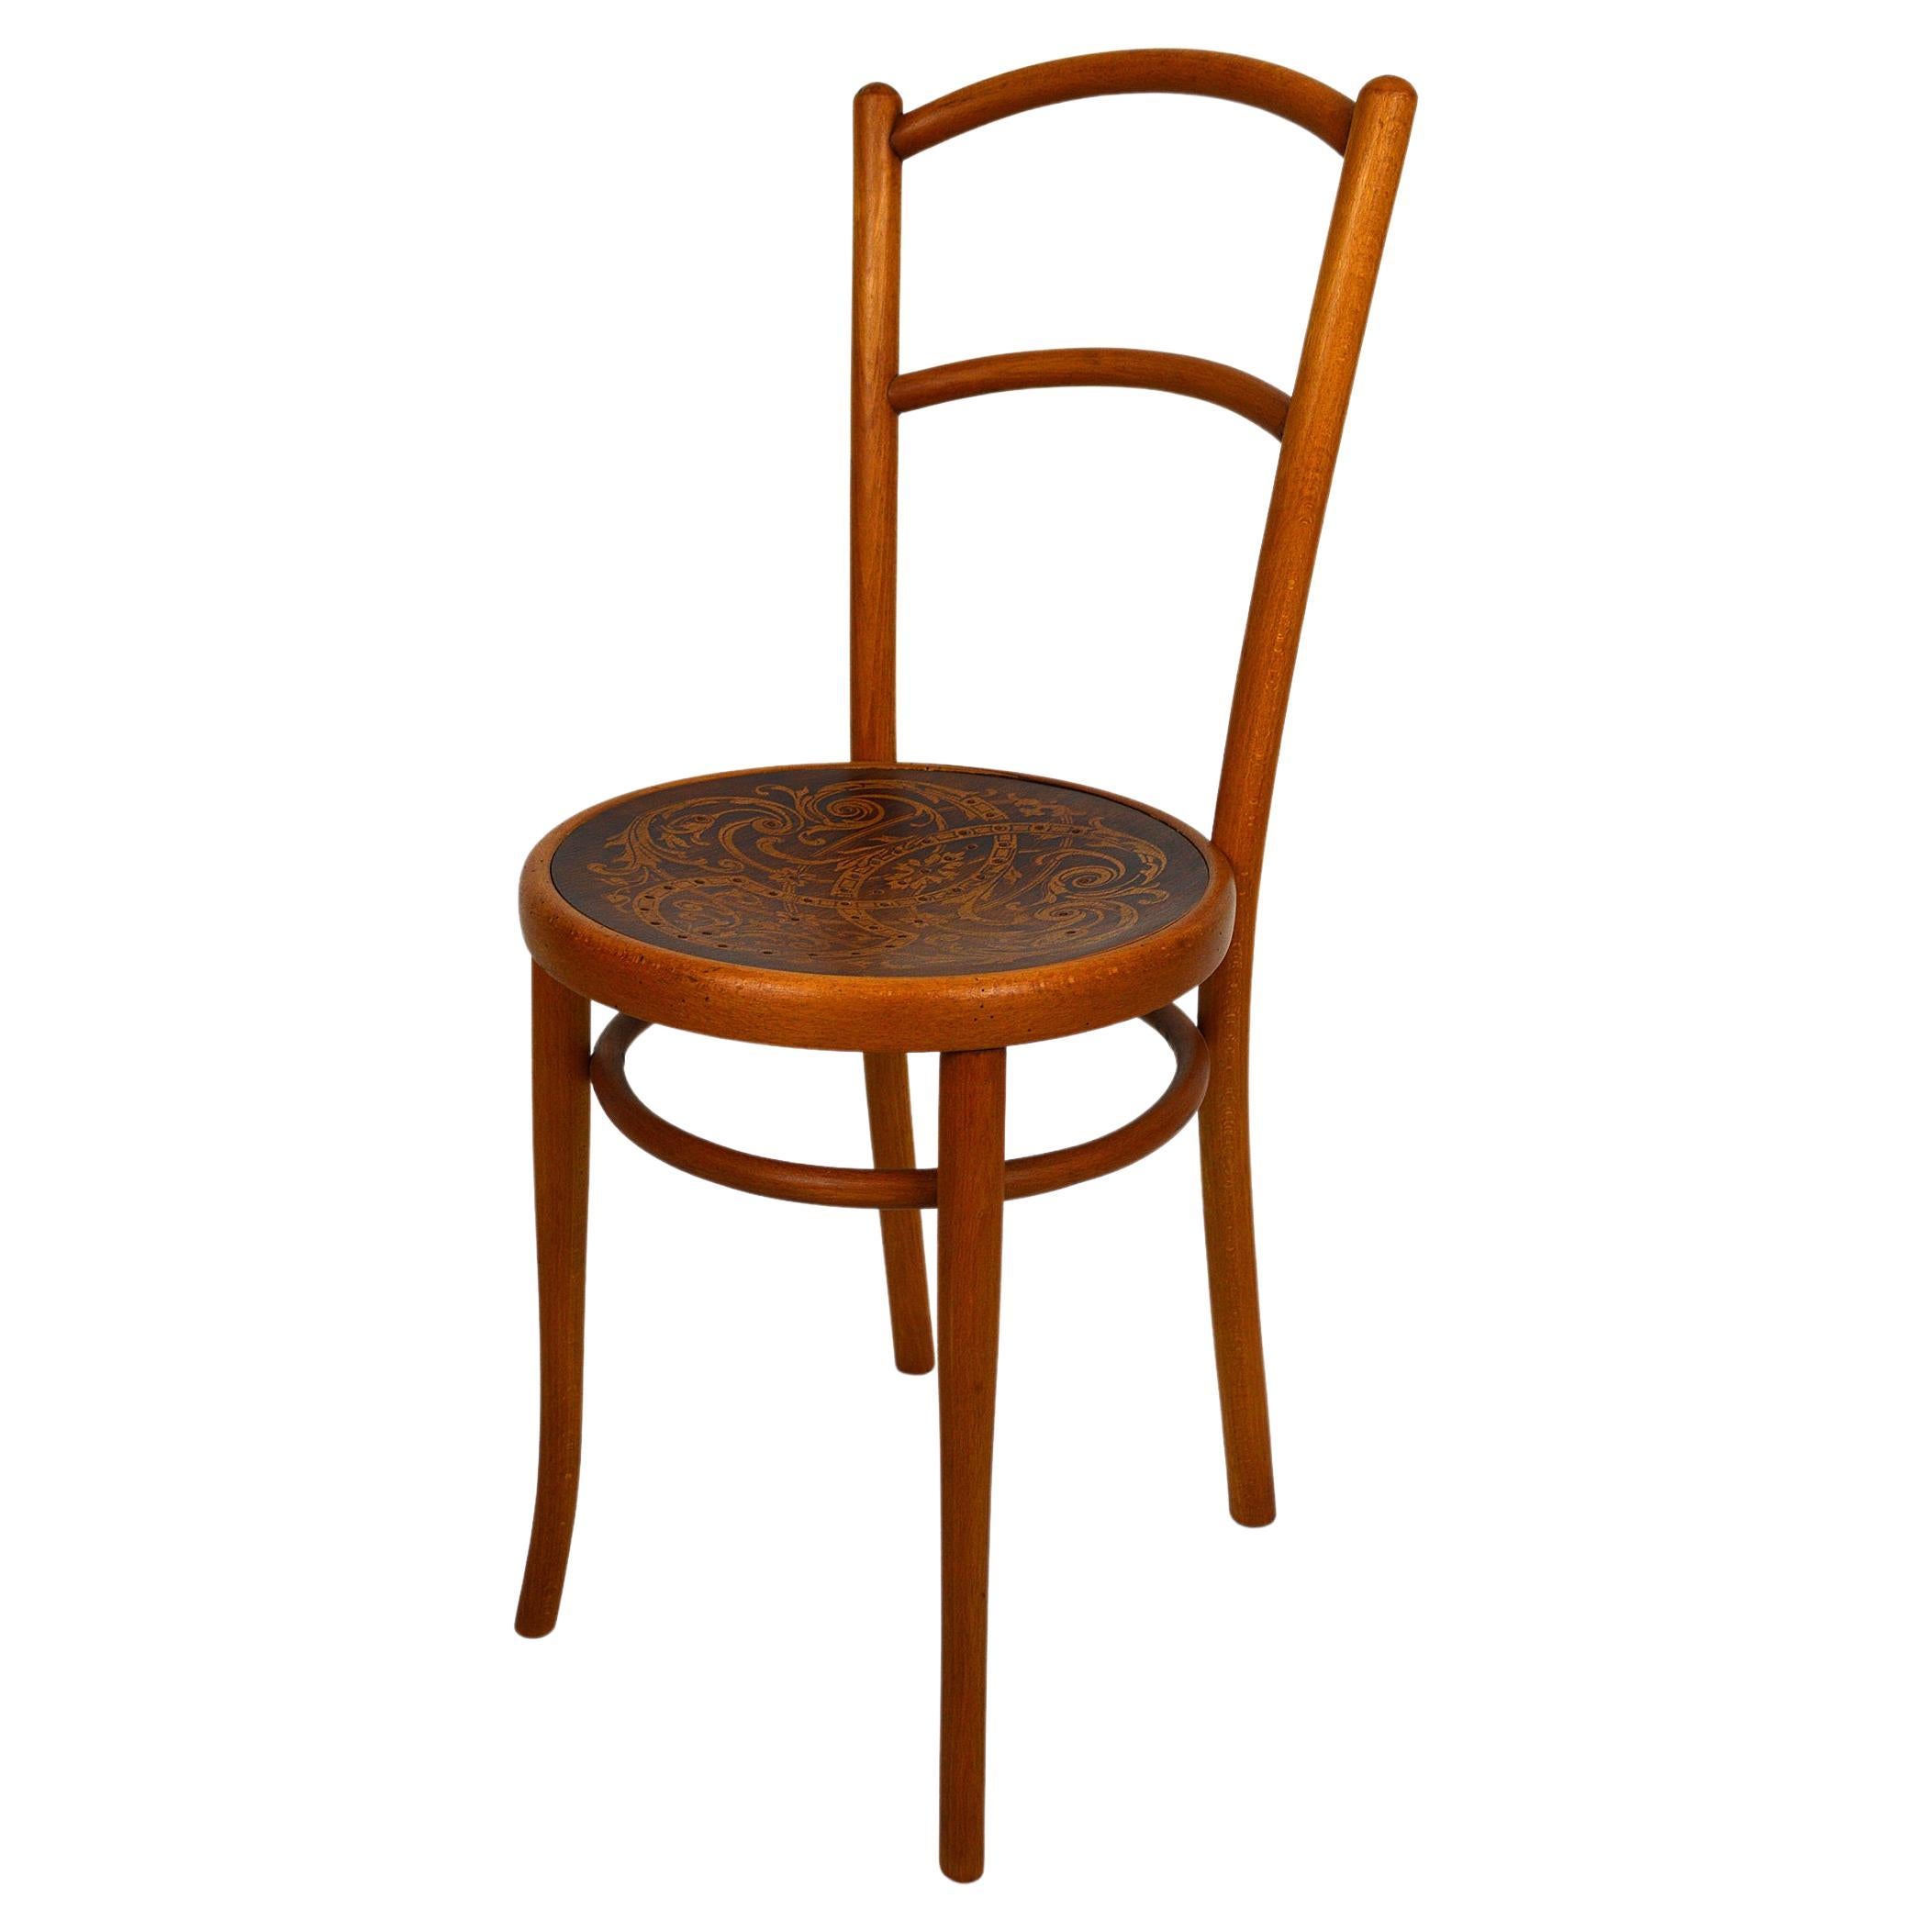 Bistro Chair by J&J Kohn with Decorated Seat, circa 1900